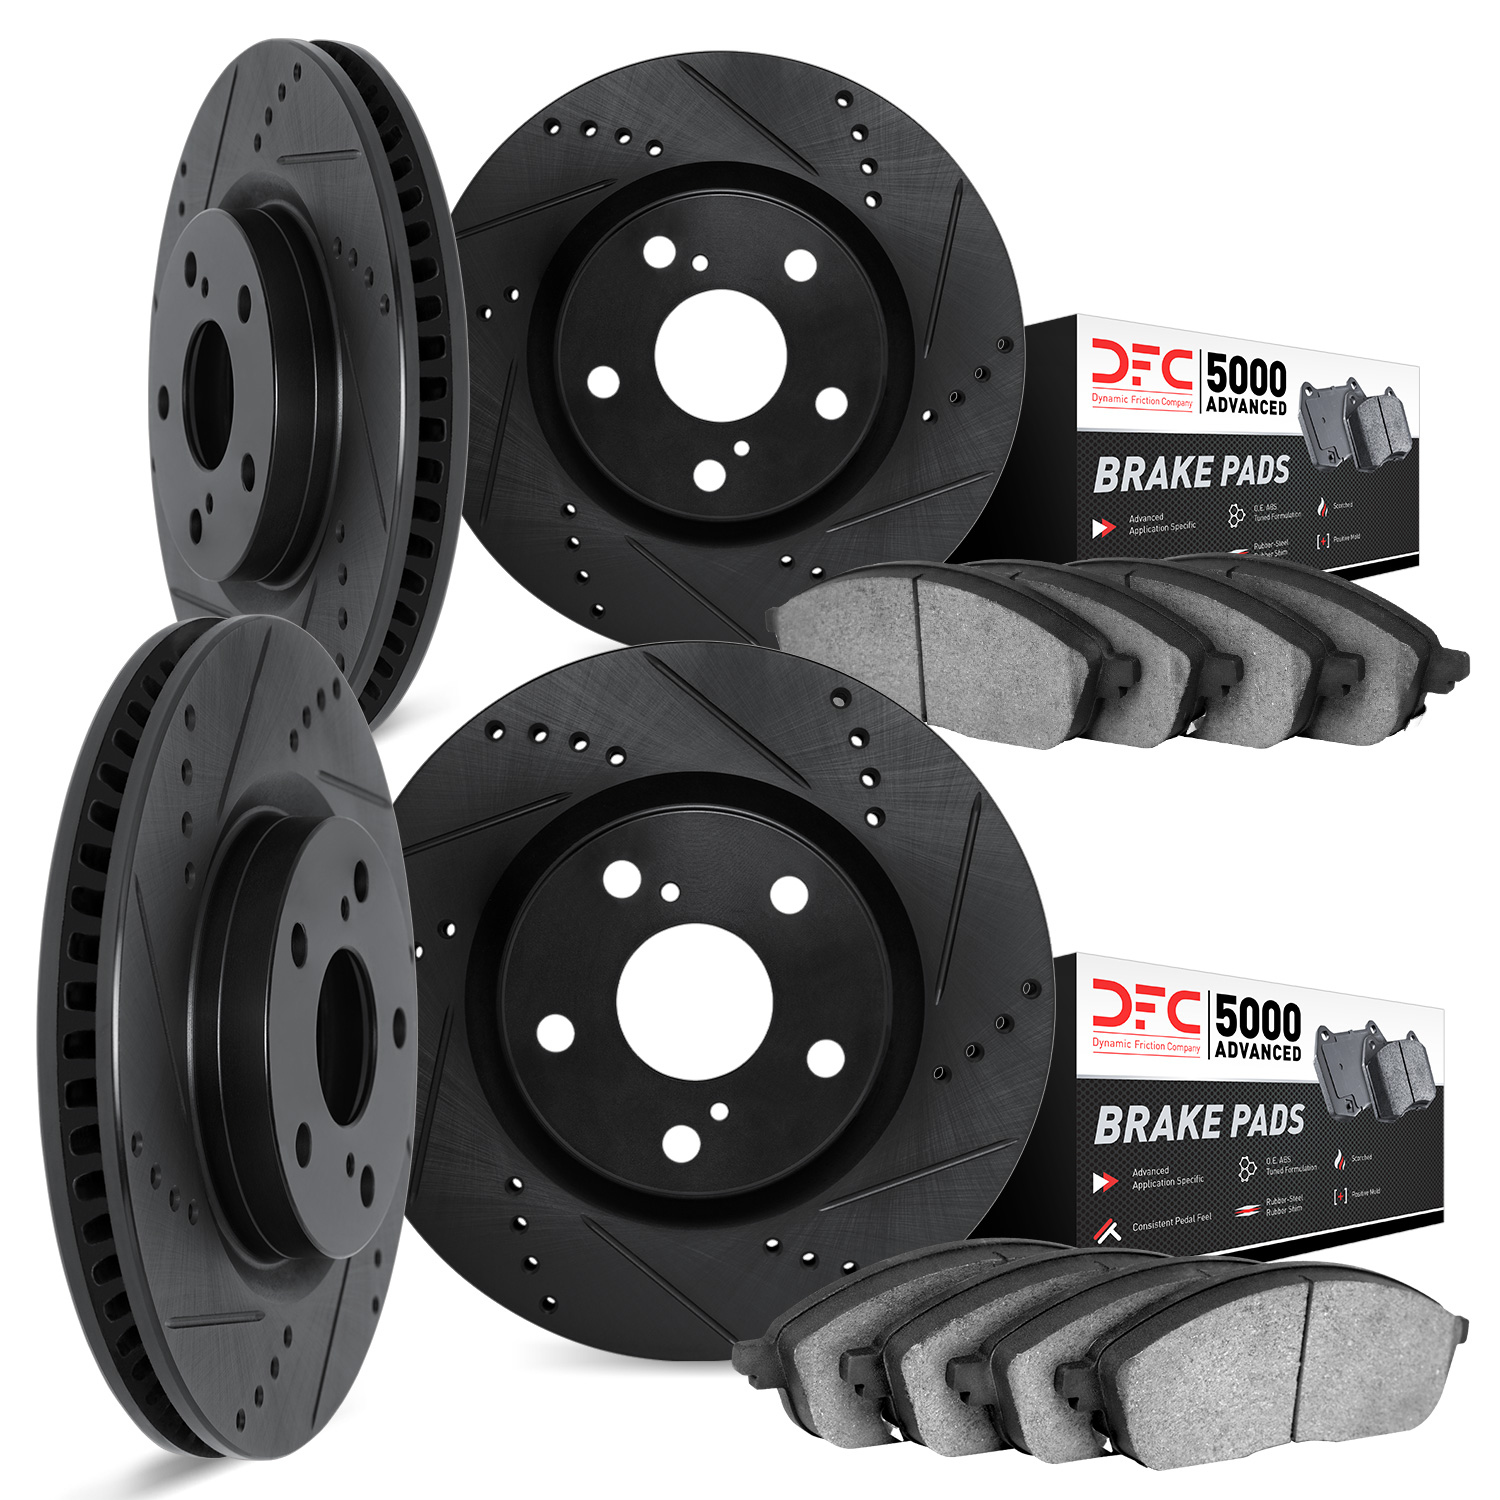 8504-74079 Drilled/Slotted Brake Rotors w/5000 Advanced Brake Pads Kit [Black], 2011-2014 Audi/Volkswagen, Position: Front and R